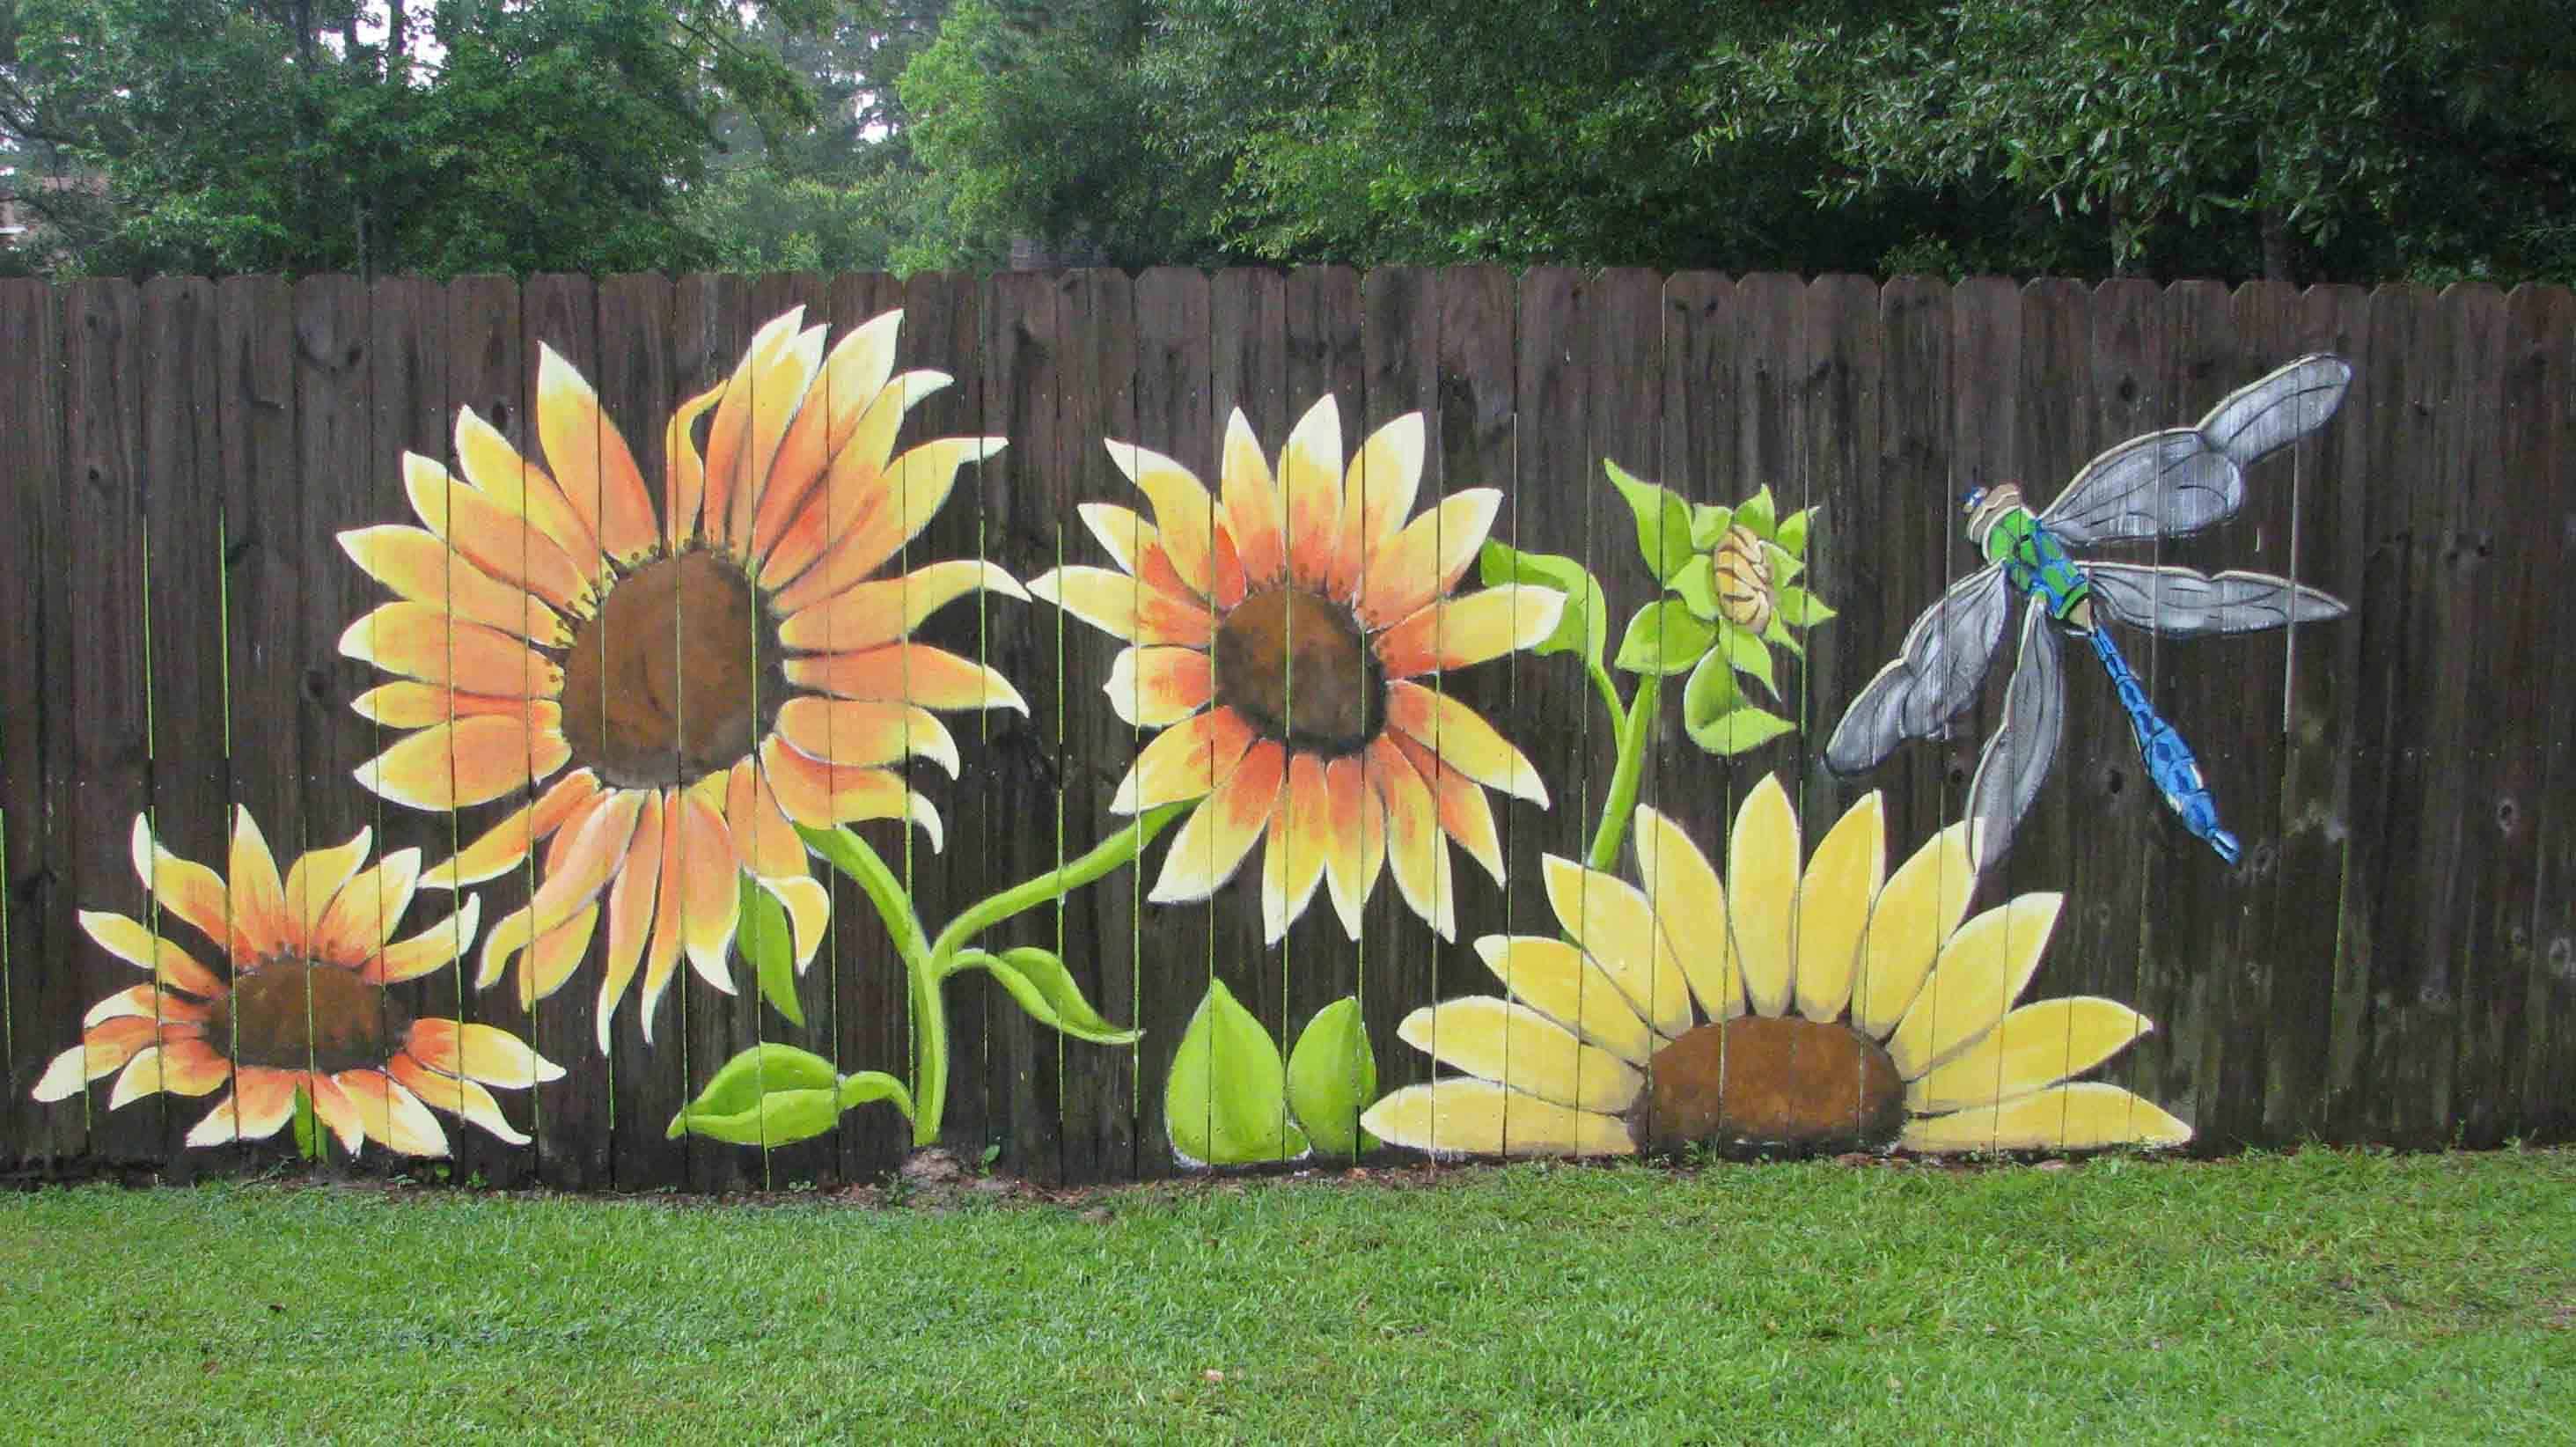 15 Stunning Fence Painting Designs To Inspire Your Own Backyard